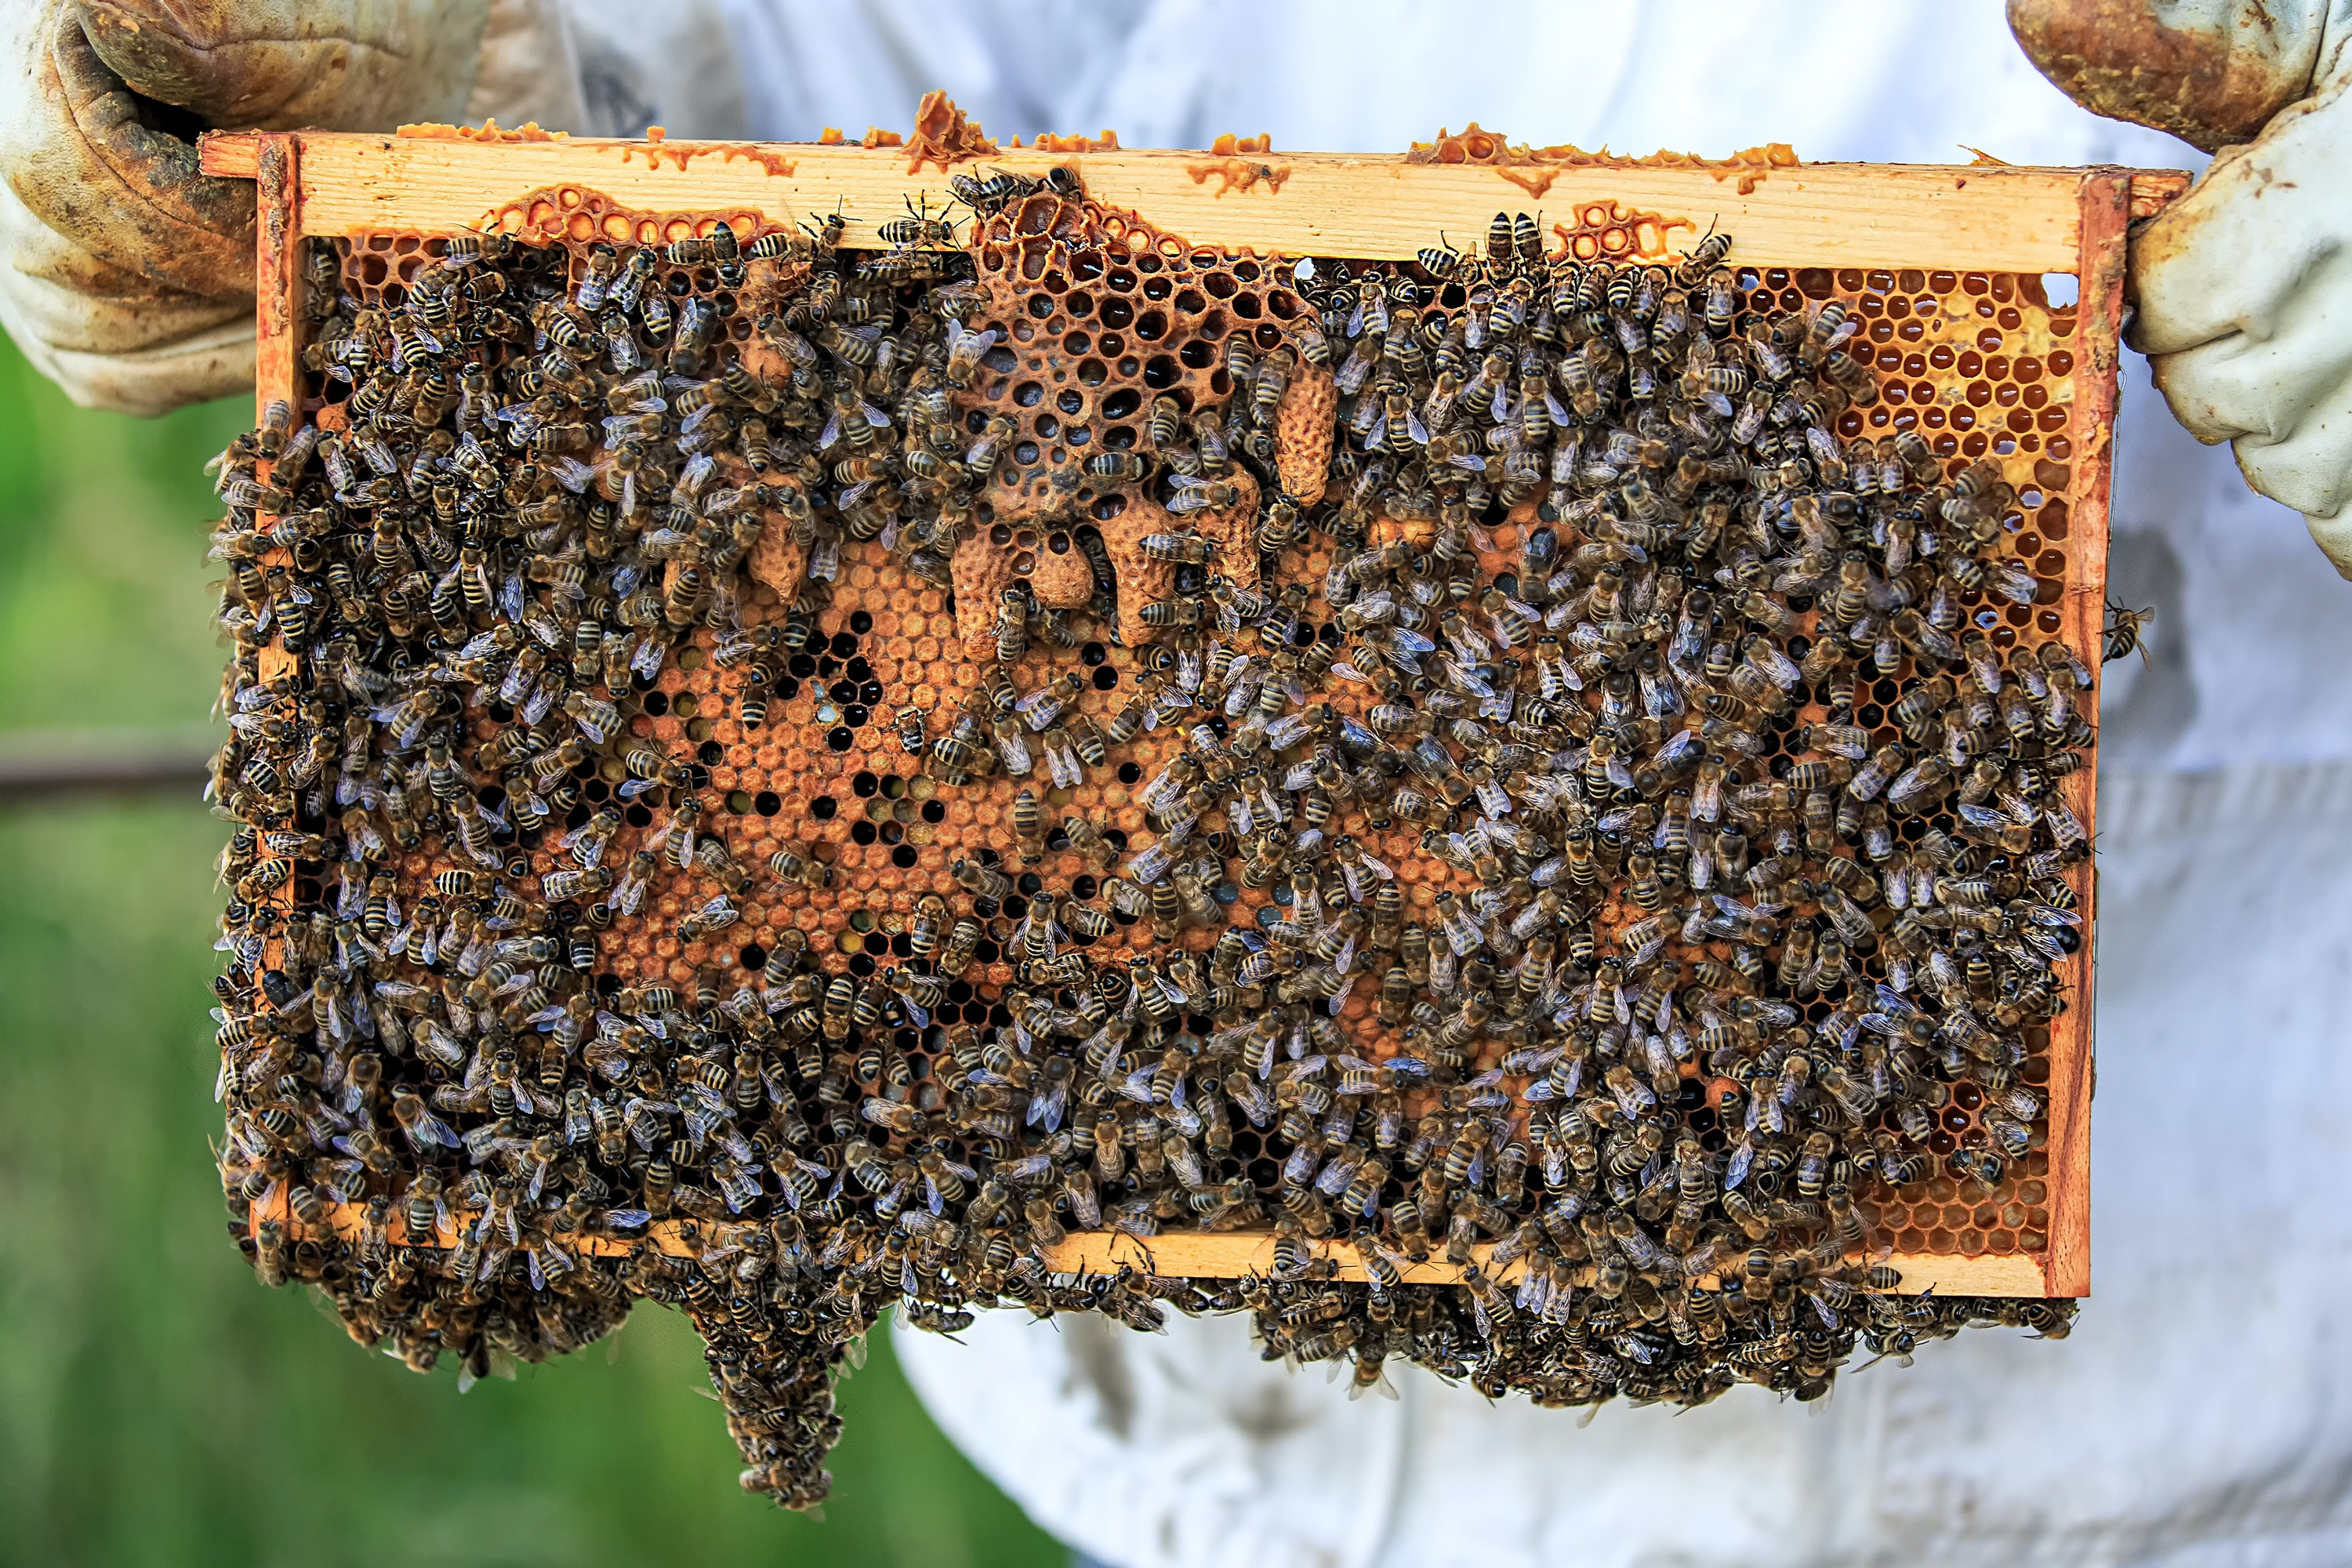 Bees hang with joined legs in between frames